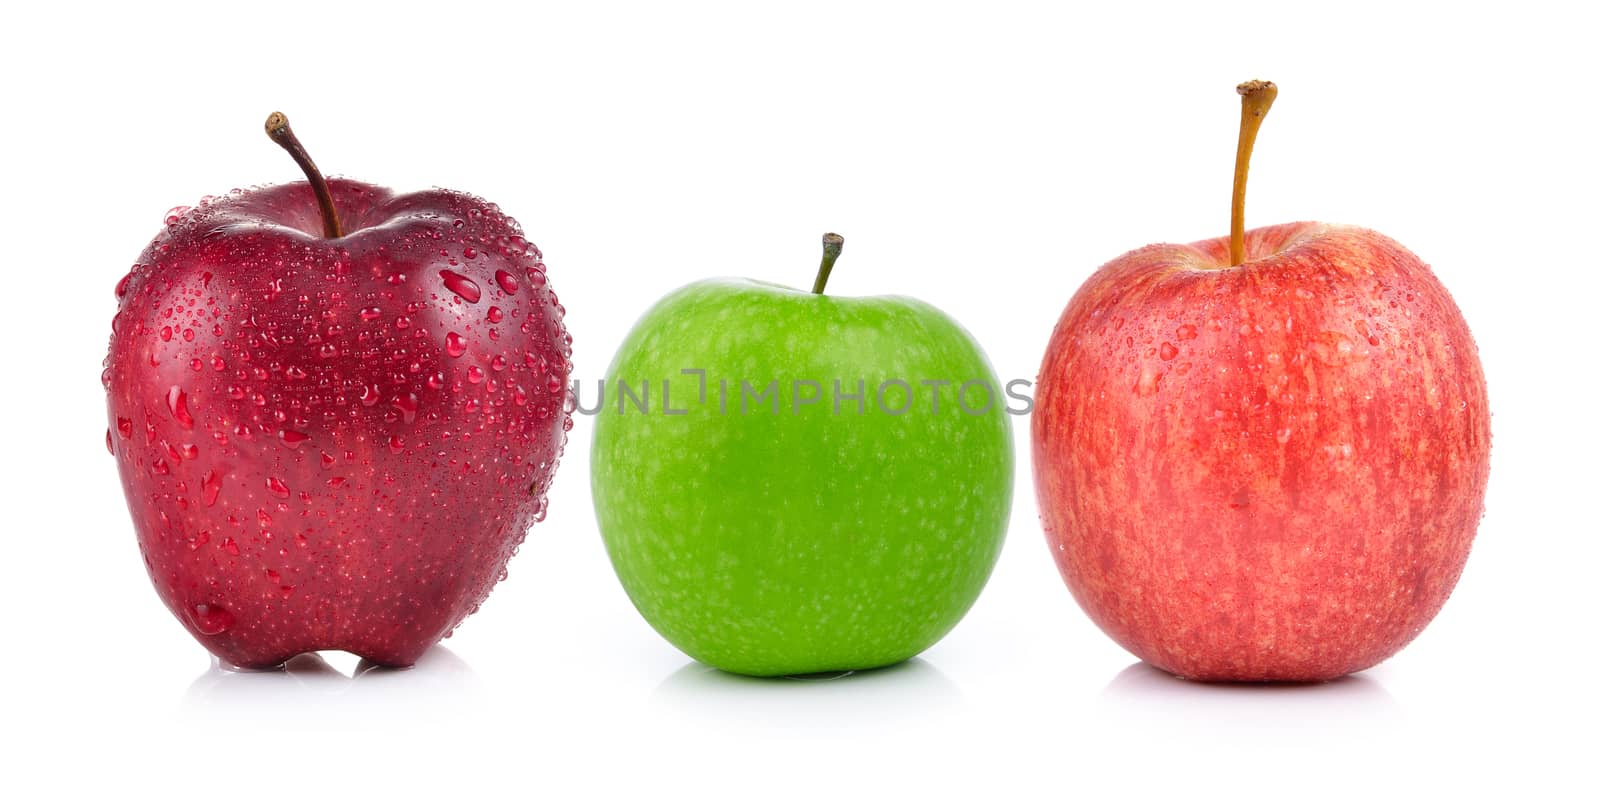 apples on white background by sommai